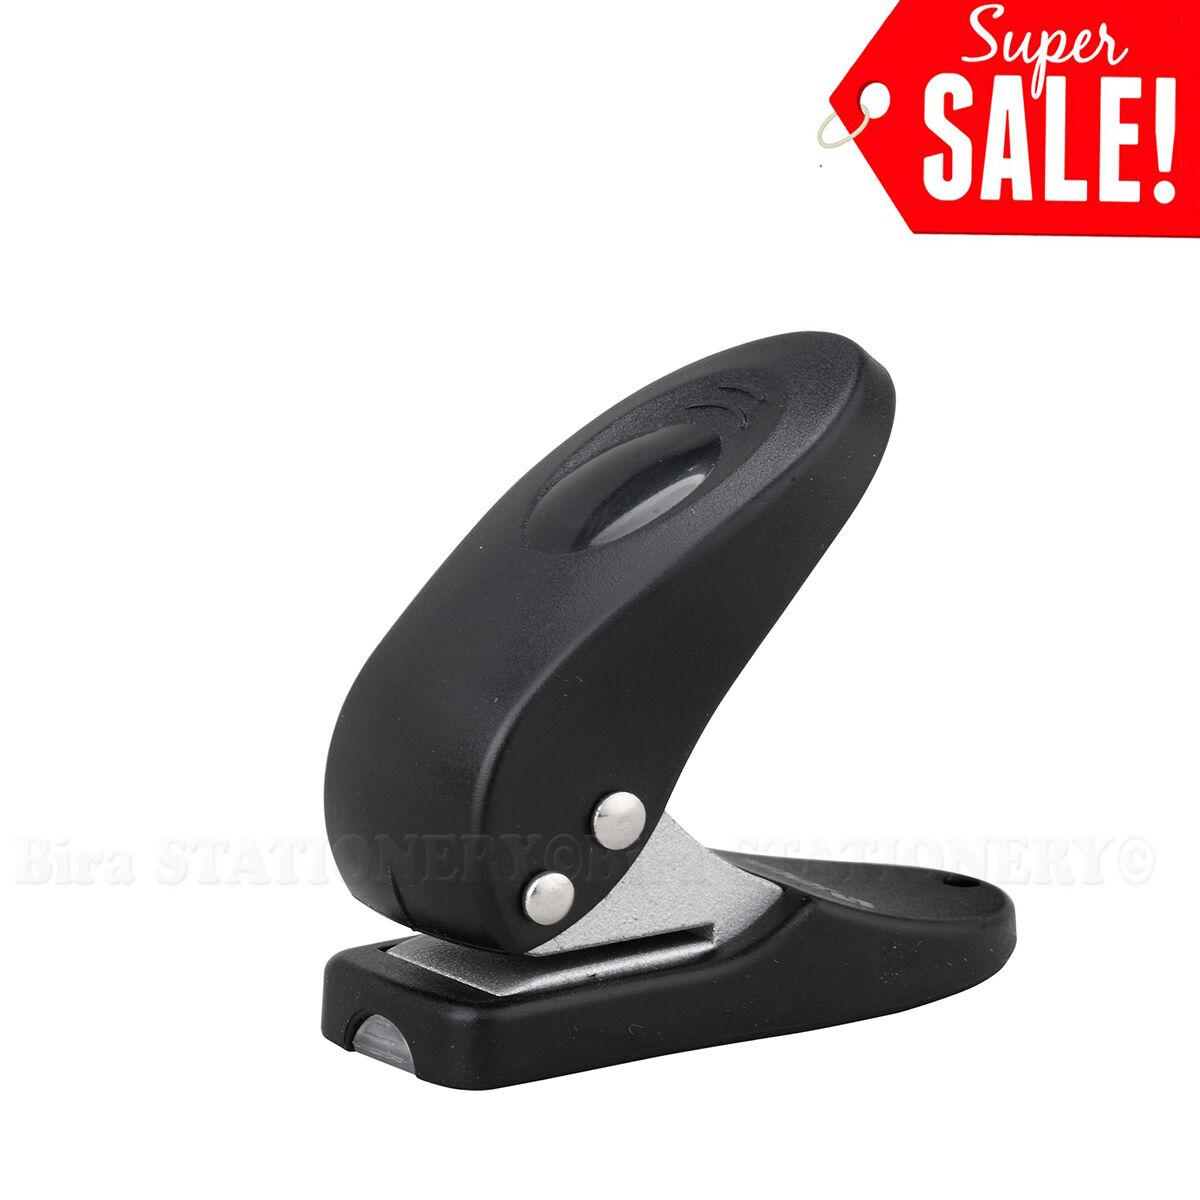 2 Pcs Single One Hole Punch 12 Sheets Capacity For Office Home School Black New